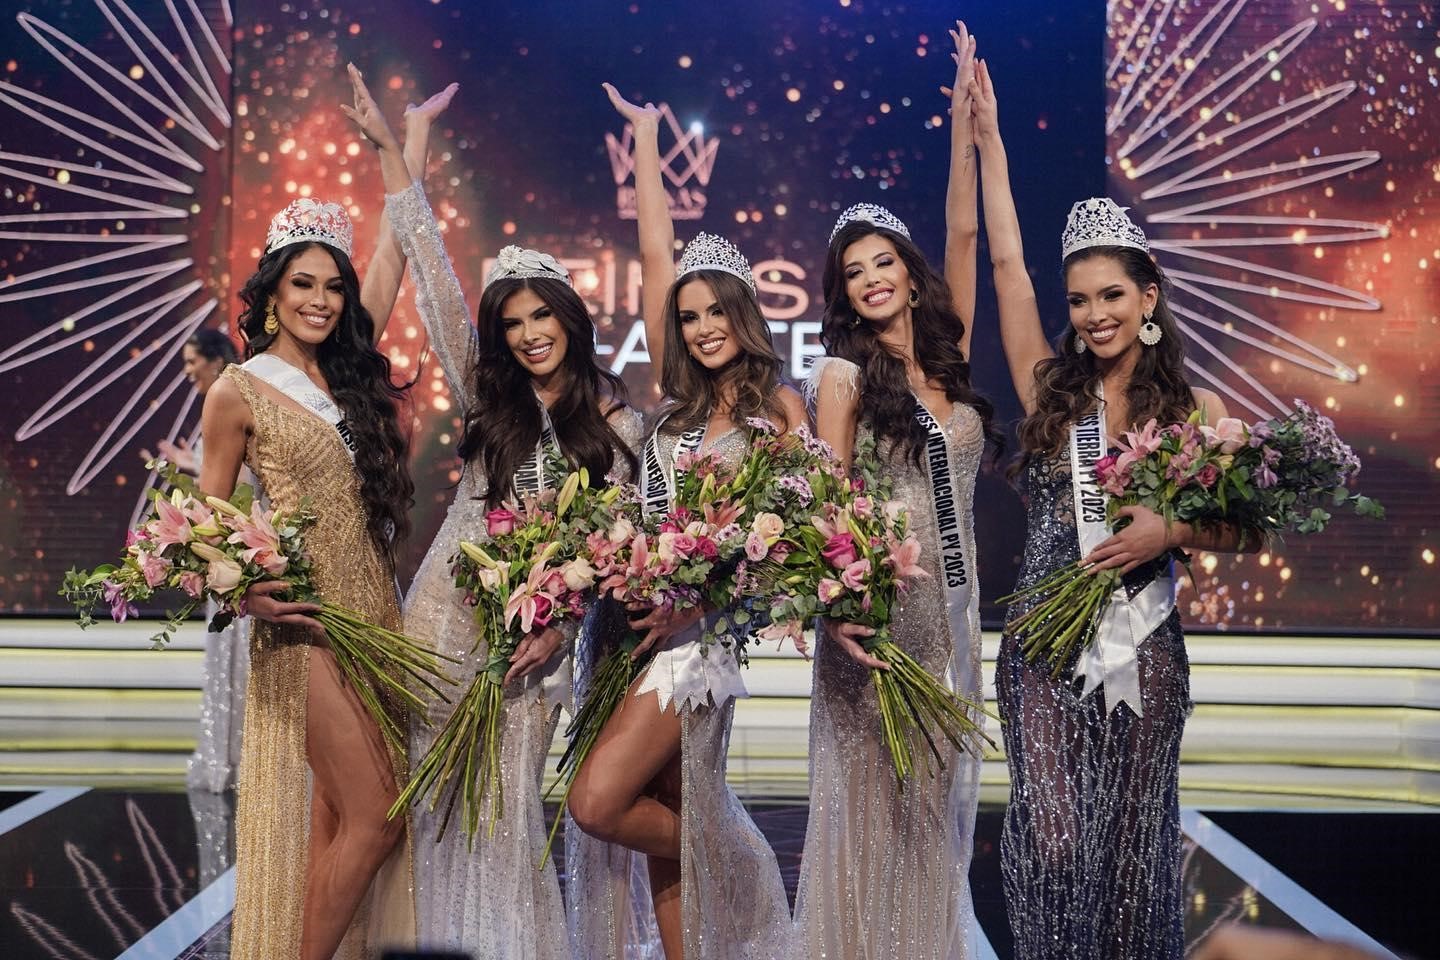 5 Miss Paraguay crowned in the same beauty pageant